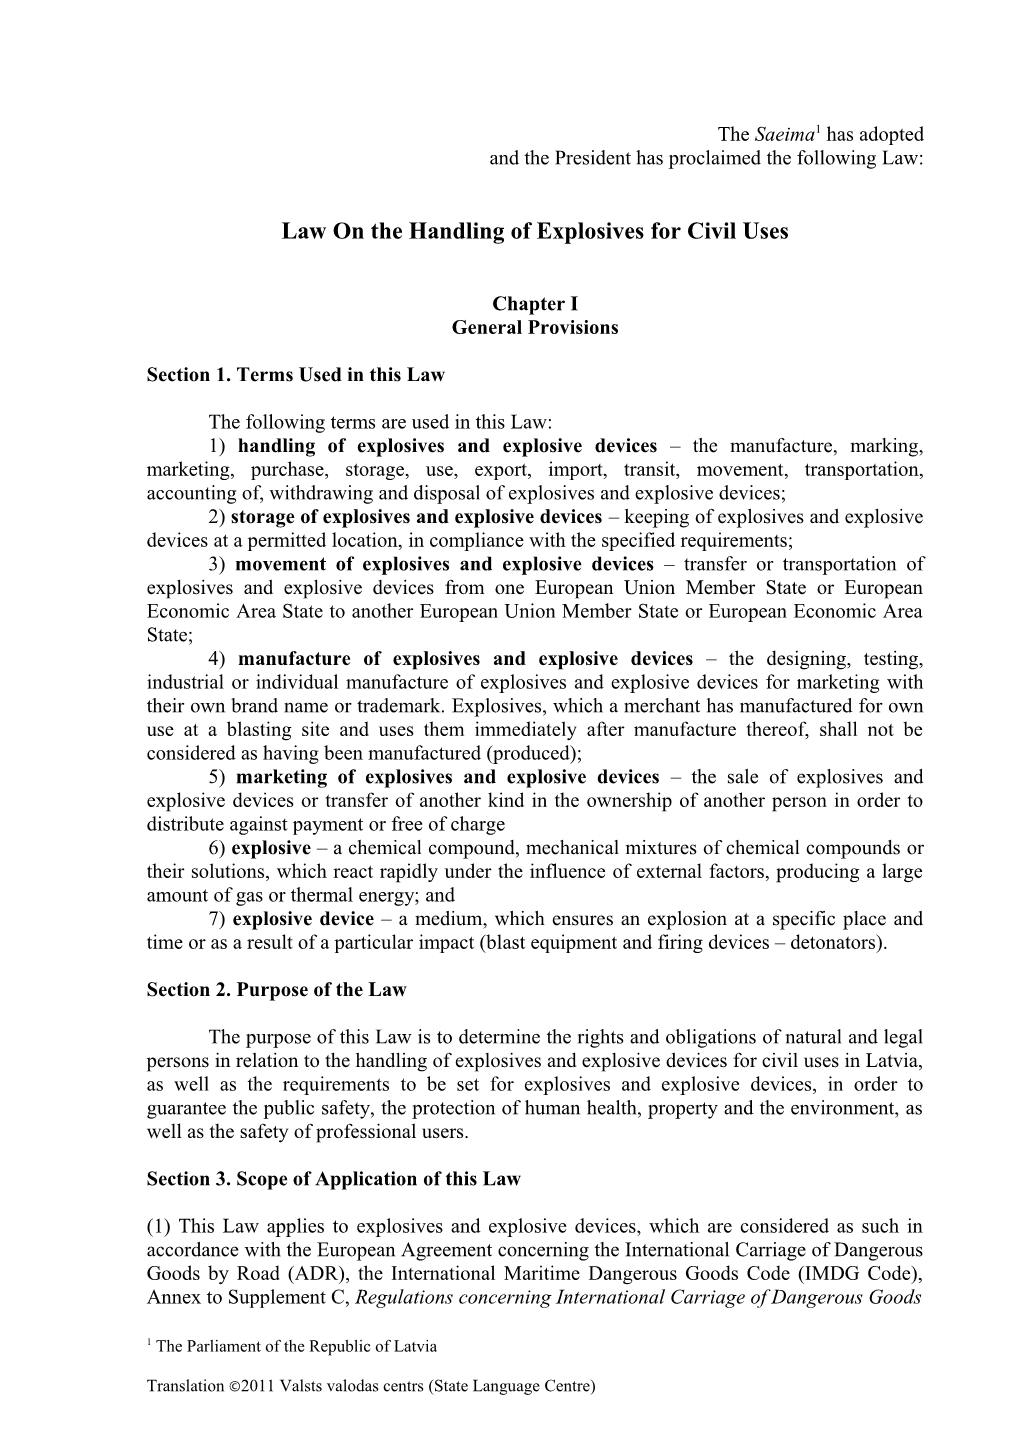 Law on the Handling of Explosives for Civil Uses